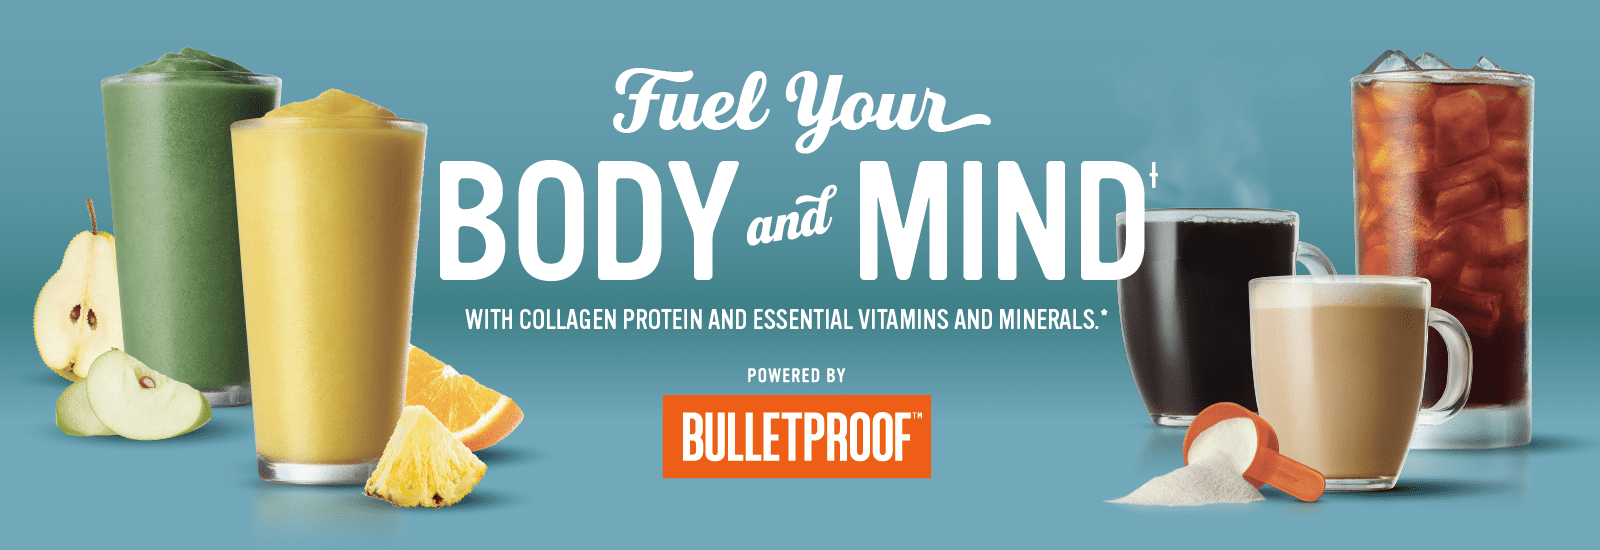 Fuel your body and mind with Caribou Coffee and Bulletproof™